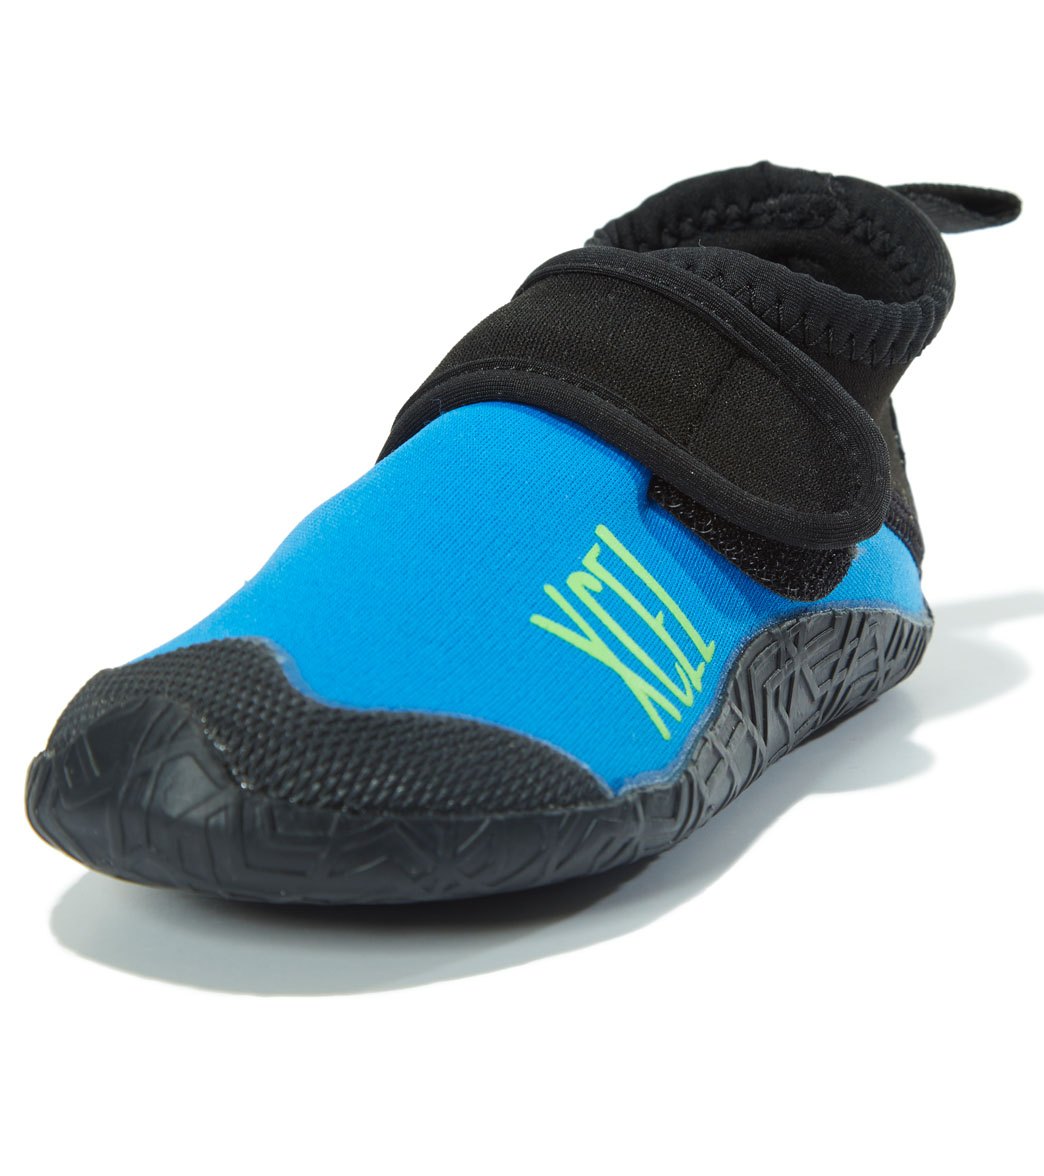 Xcel Reefwalker 1Mm Round Toe Reef Boot - Electric Blue 1 - Swimoutlet.com